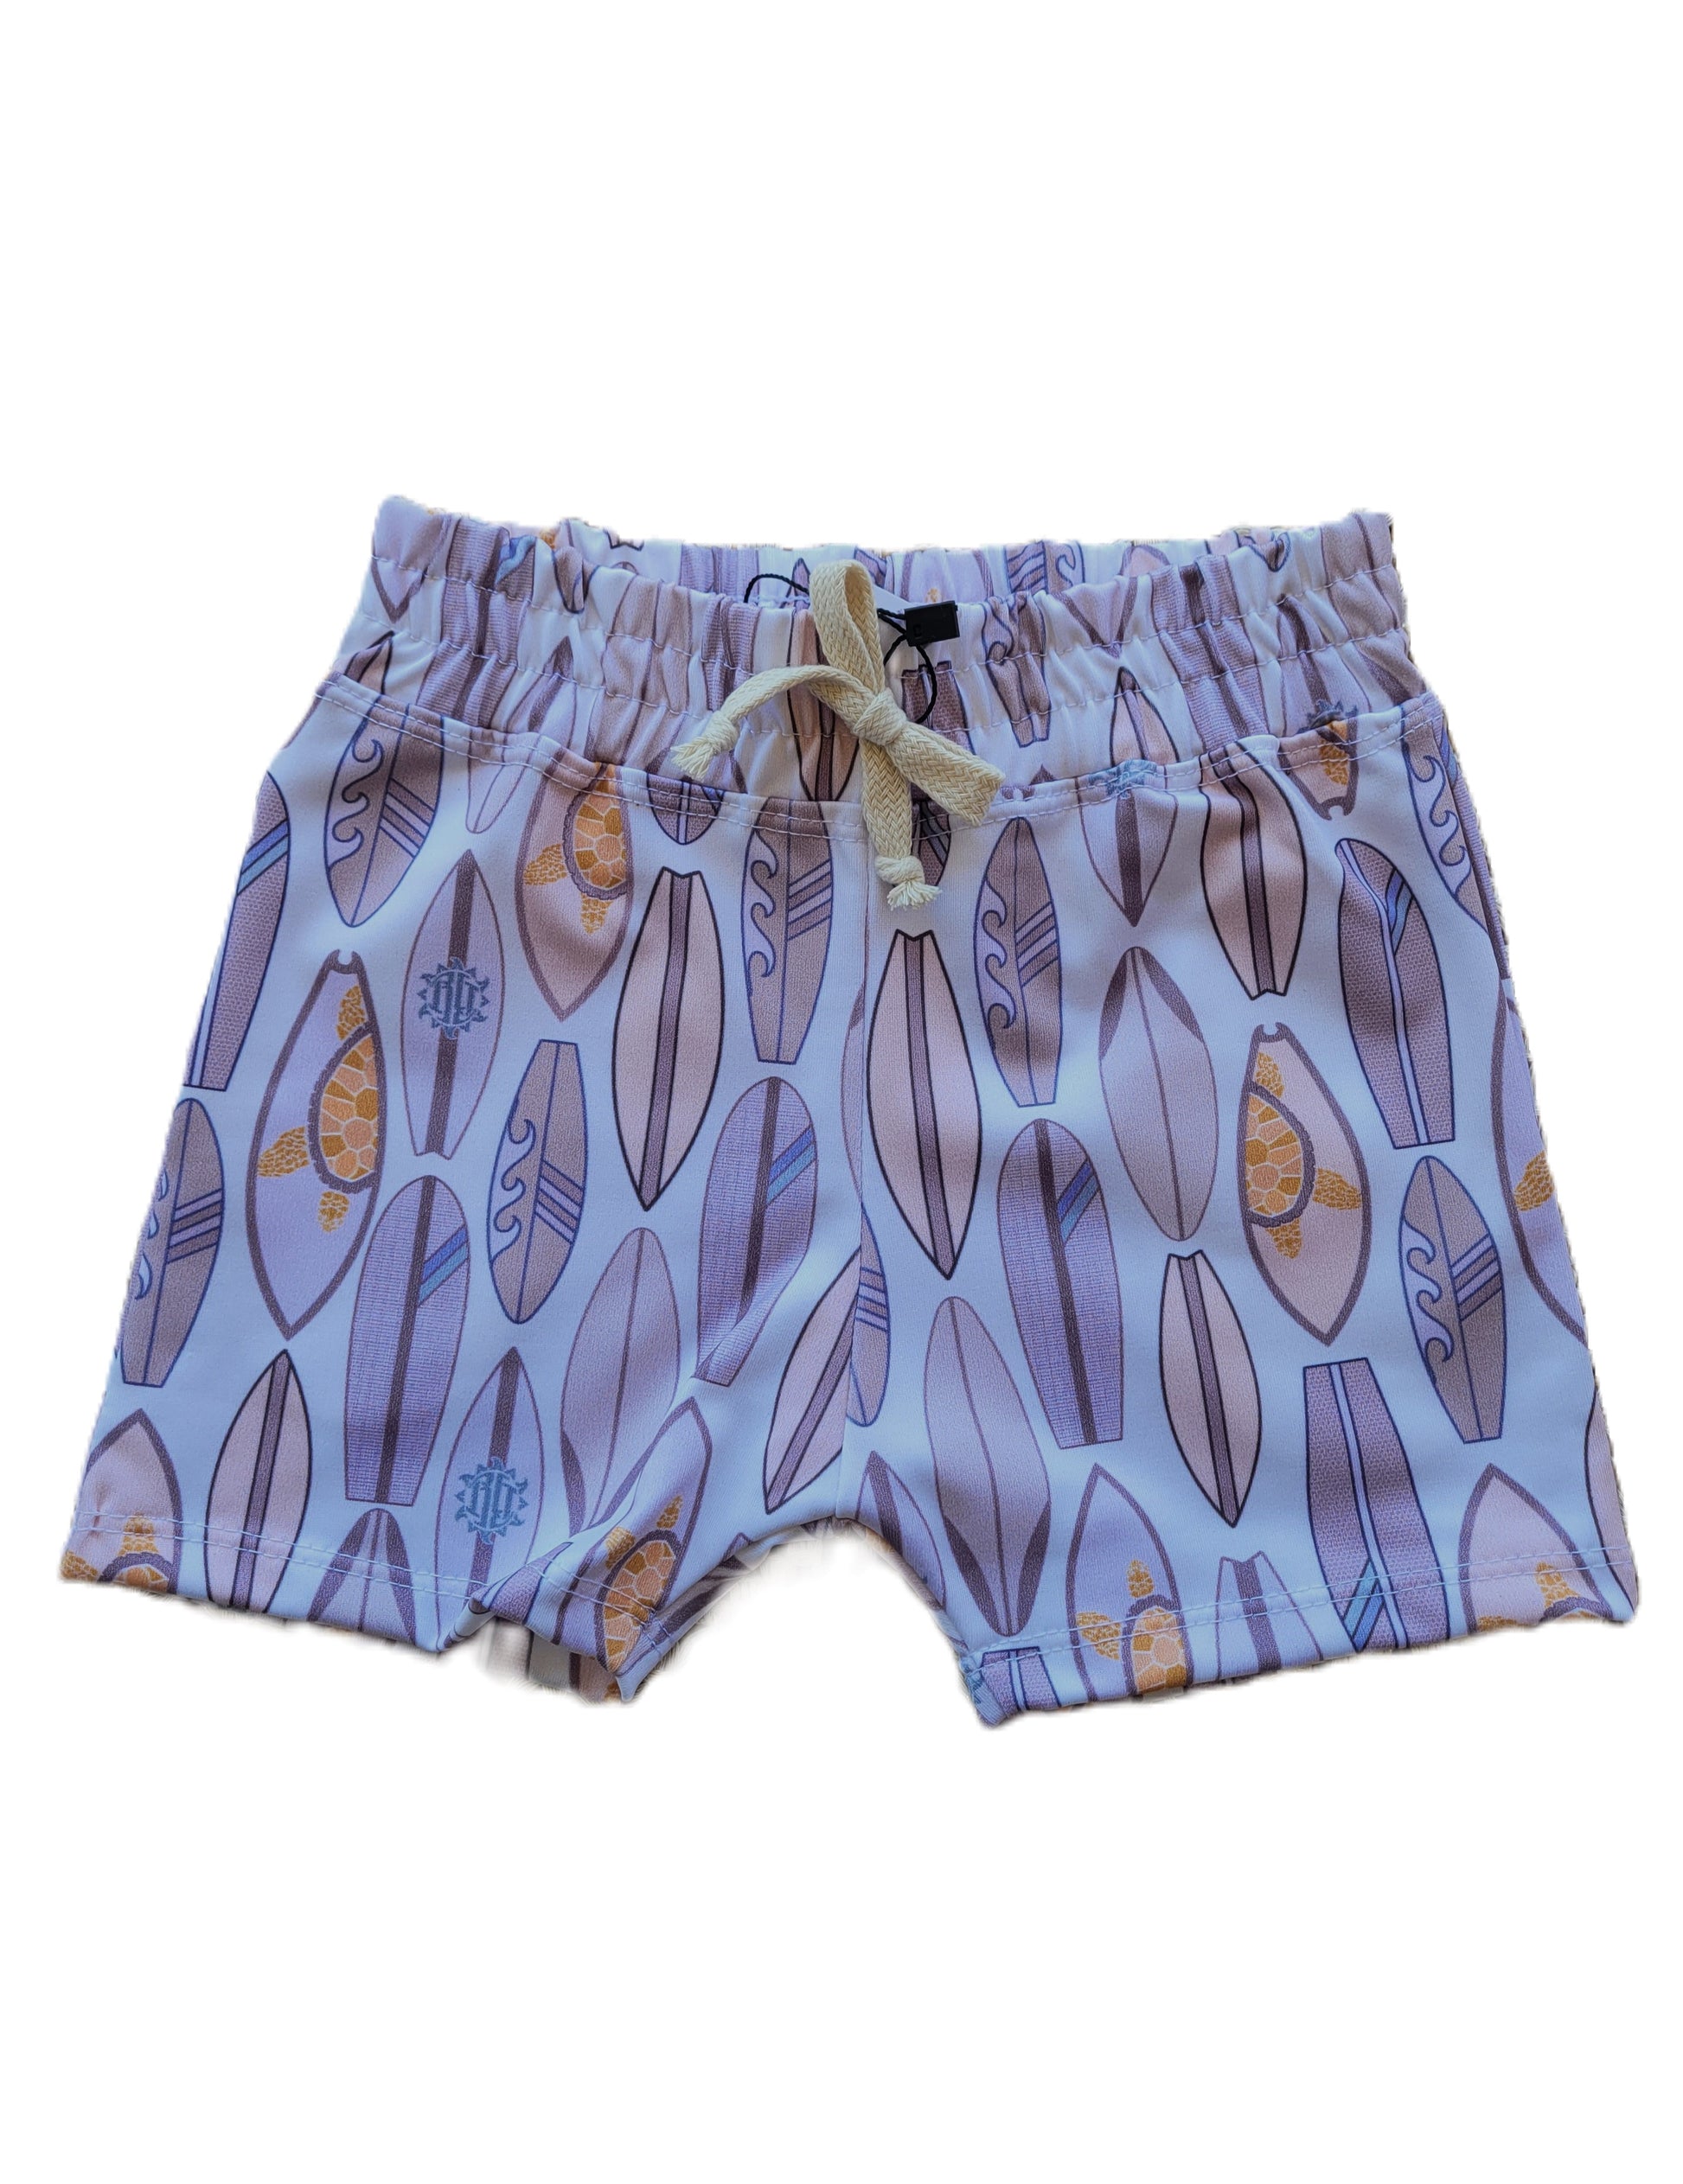 Front of Boys Swim Shorts - White with Natural colored surfboards and Turtles